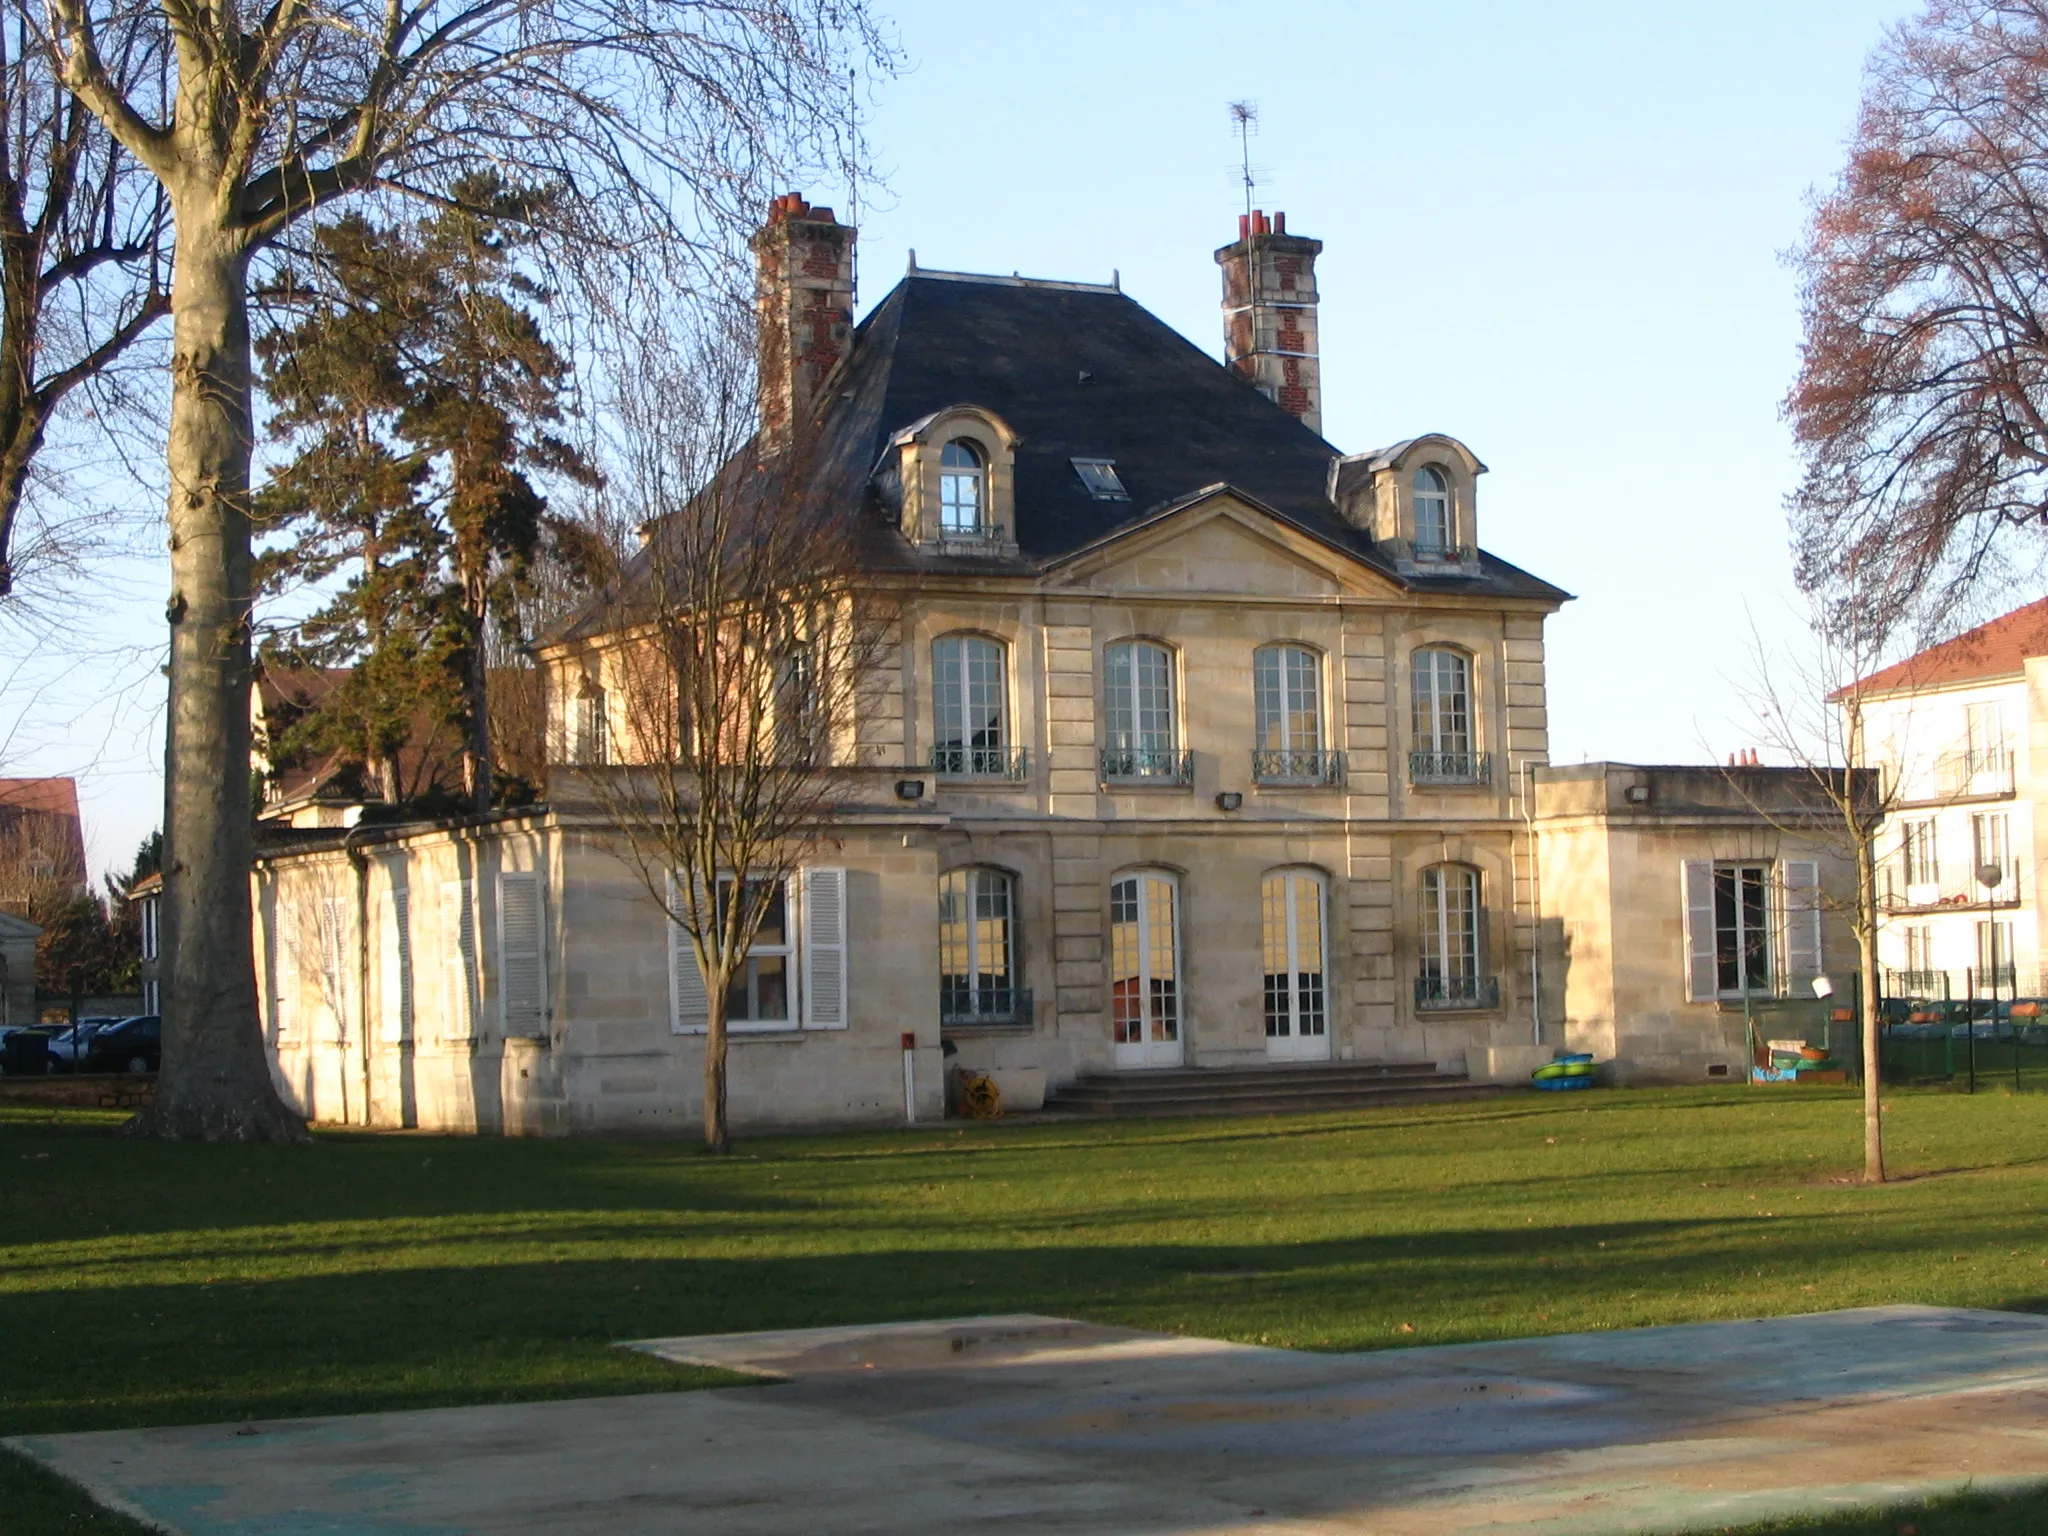 Photo showing: The old building hosting the Centre de Loisirs of Chambly, Oise, France.